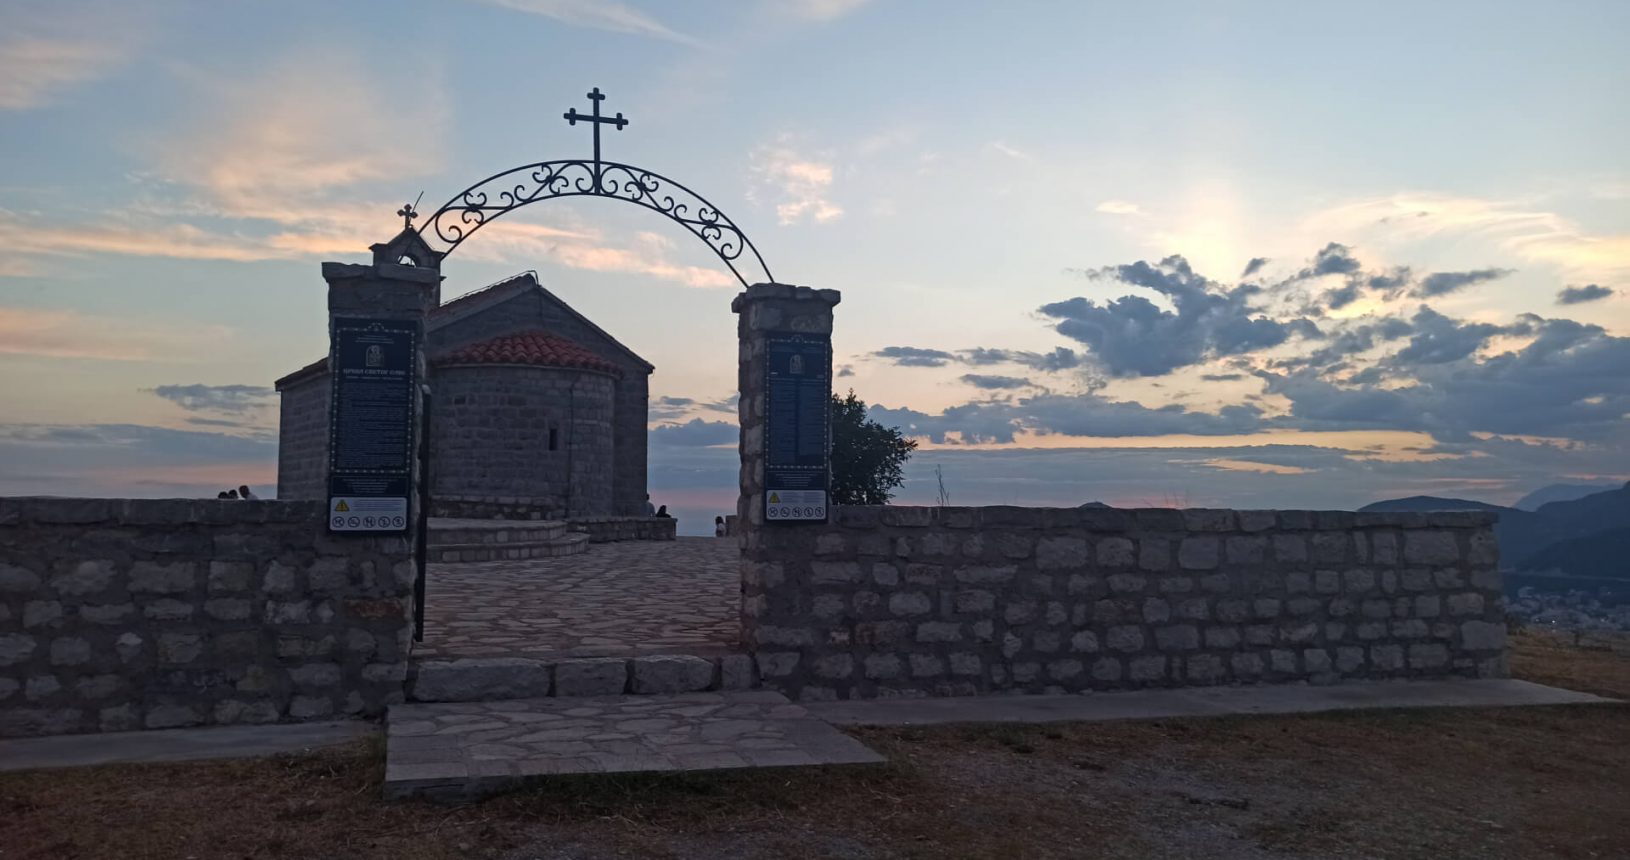 Entrance to Viewpoint St Sava Church. Sunset